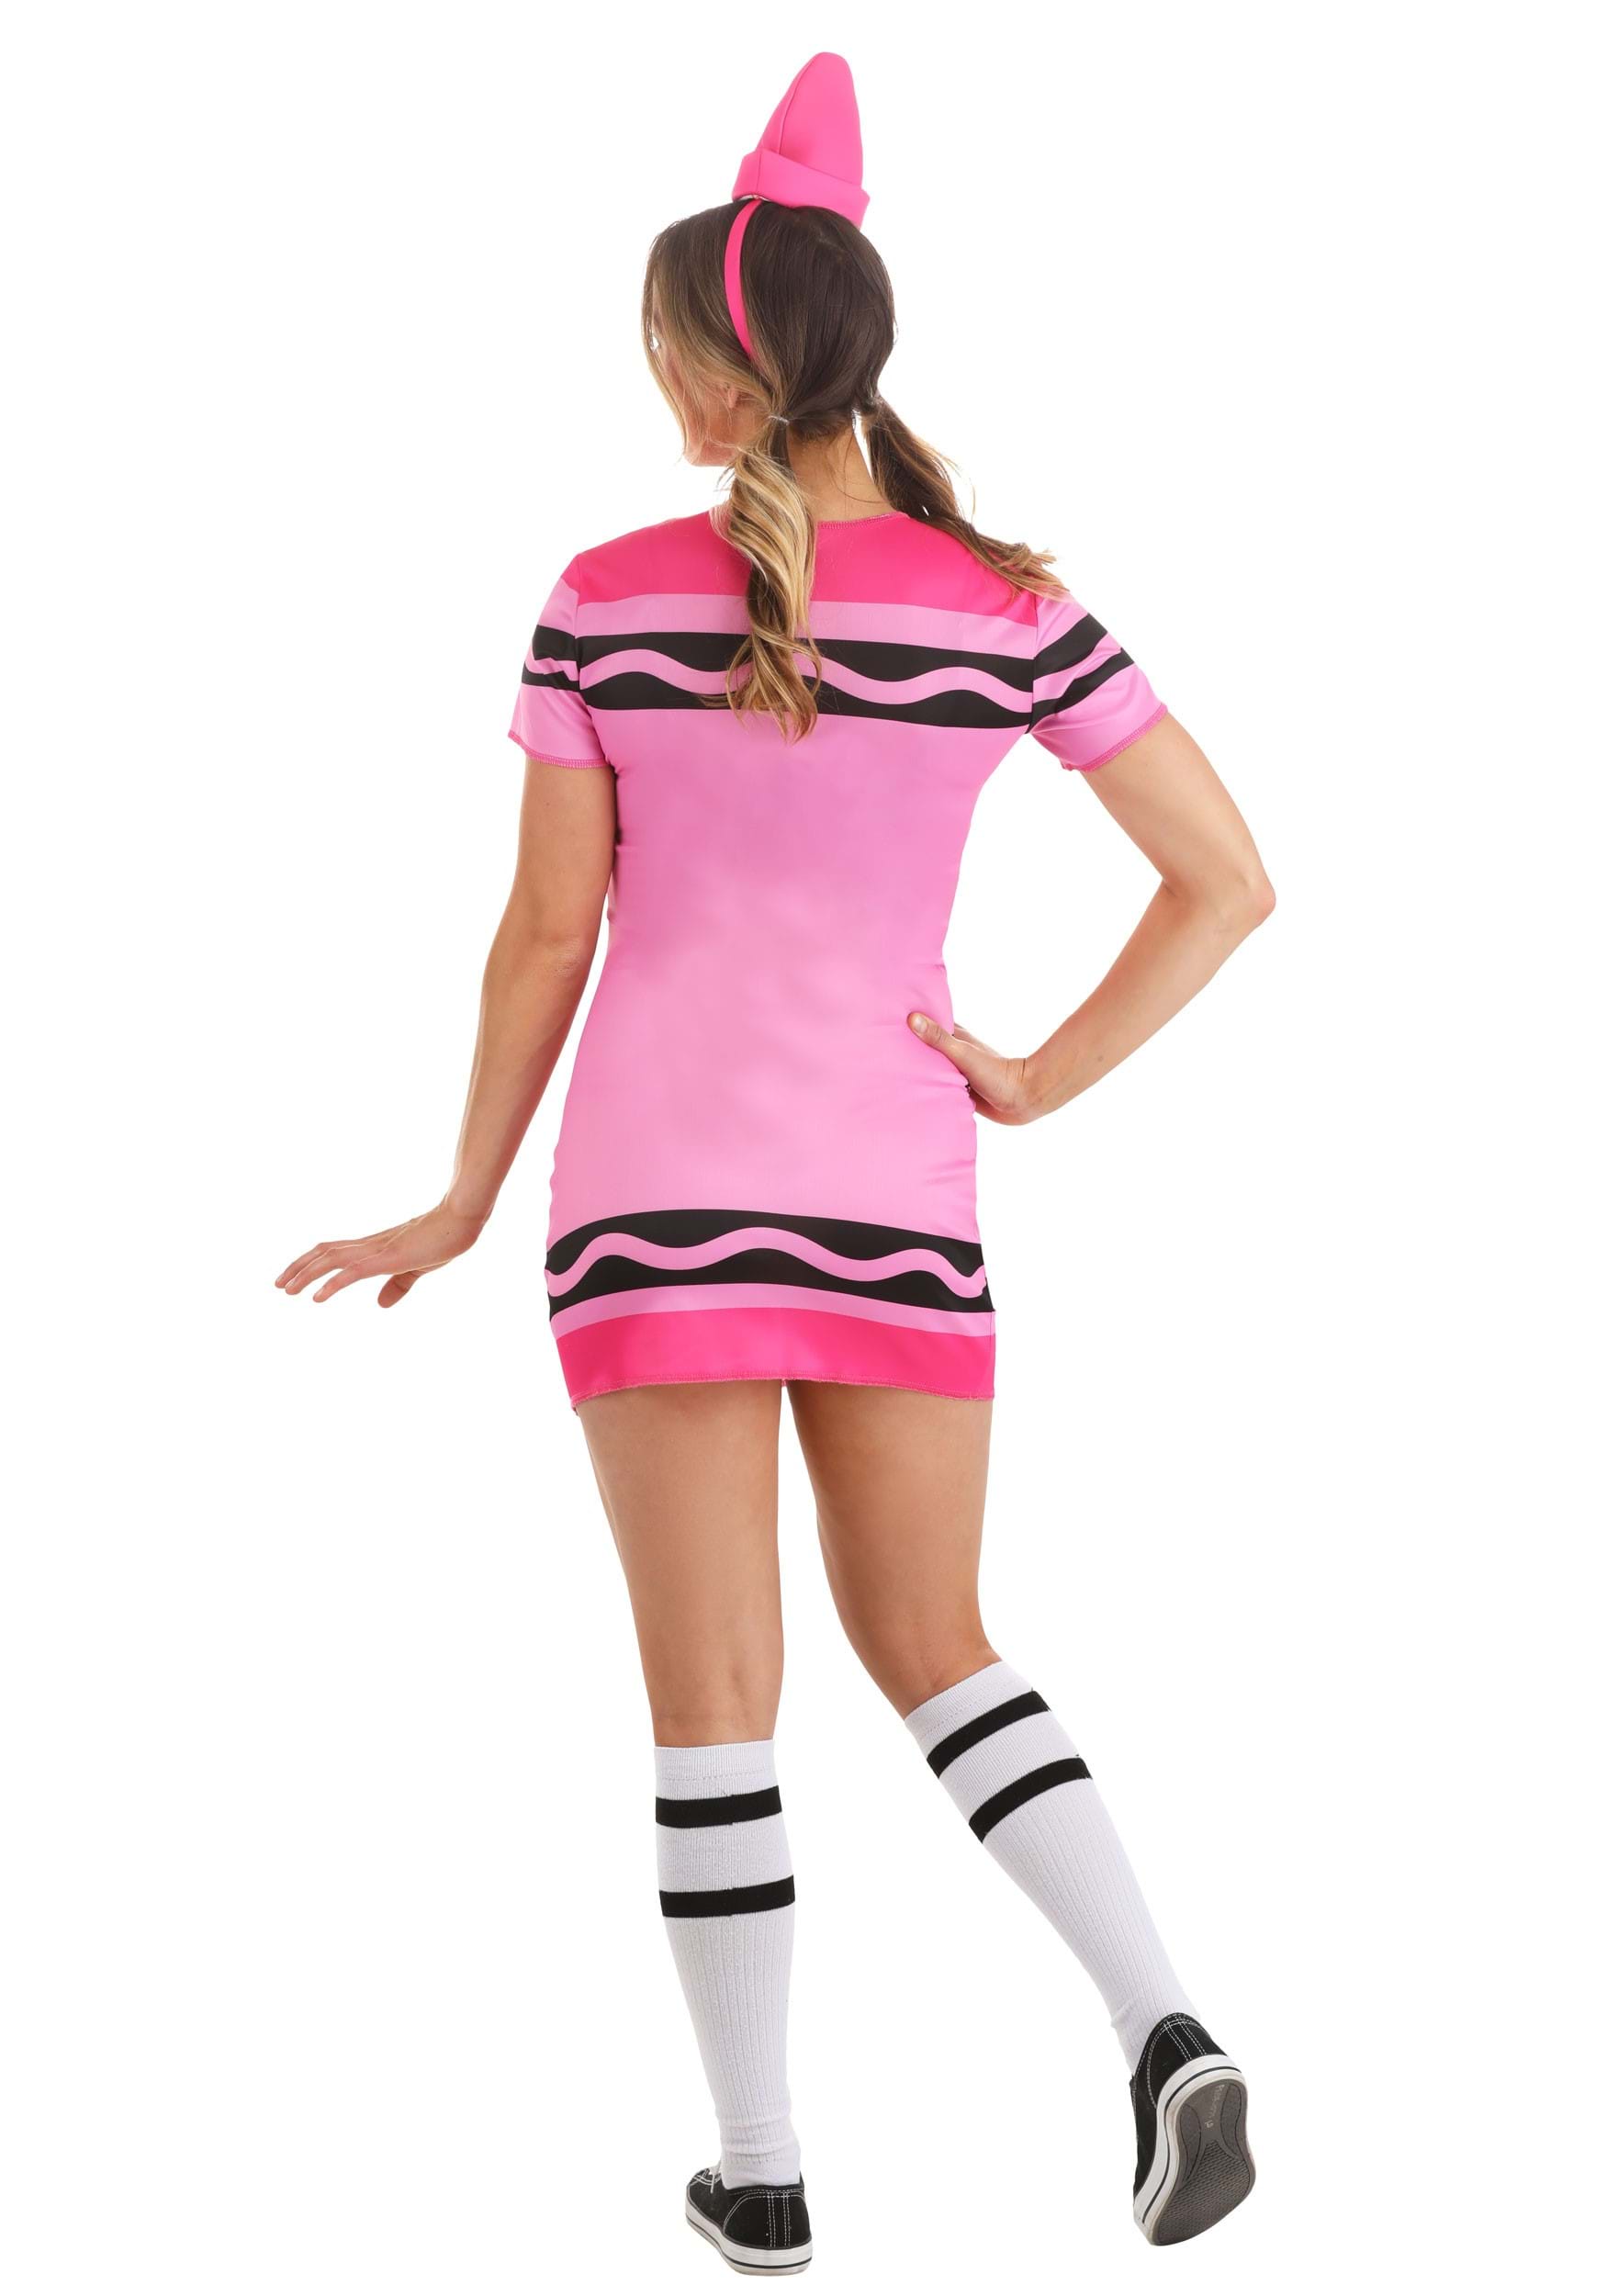 https://images.fun.com/products/70515/2-1-252344/womens-tickle-me-pink-crayola-crayon-costume-alt-5.jpg